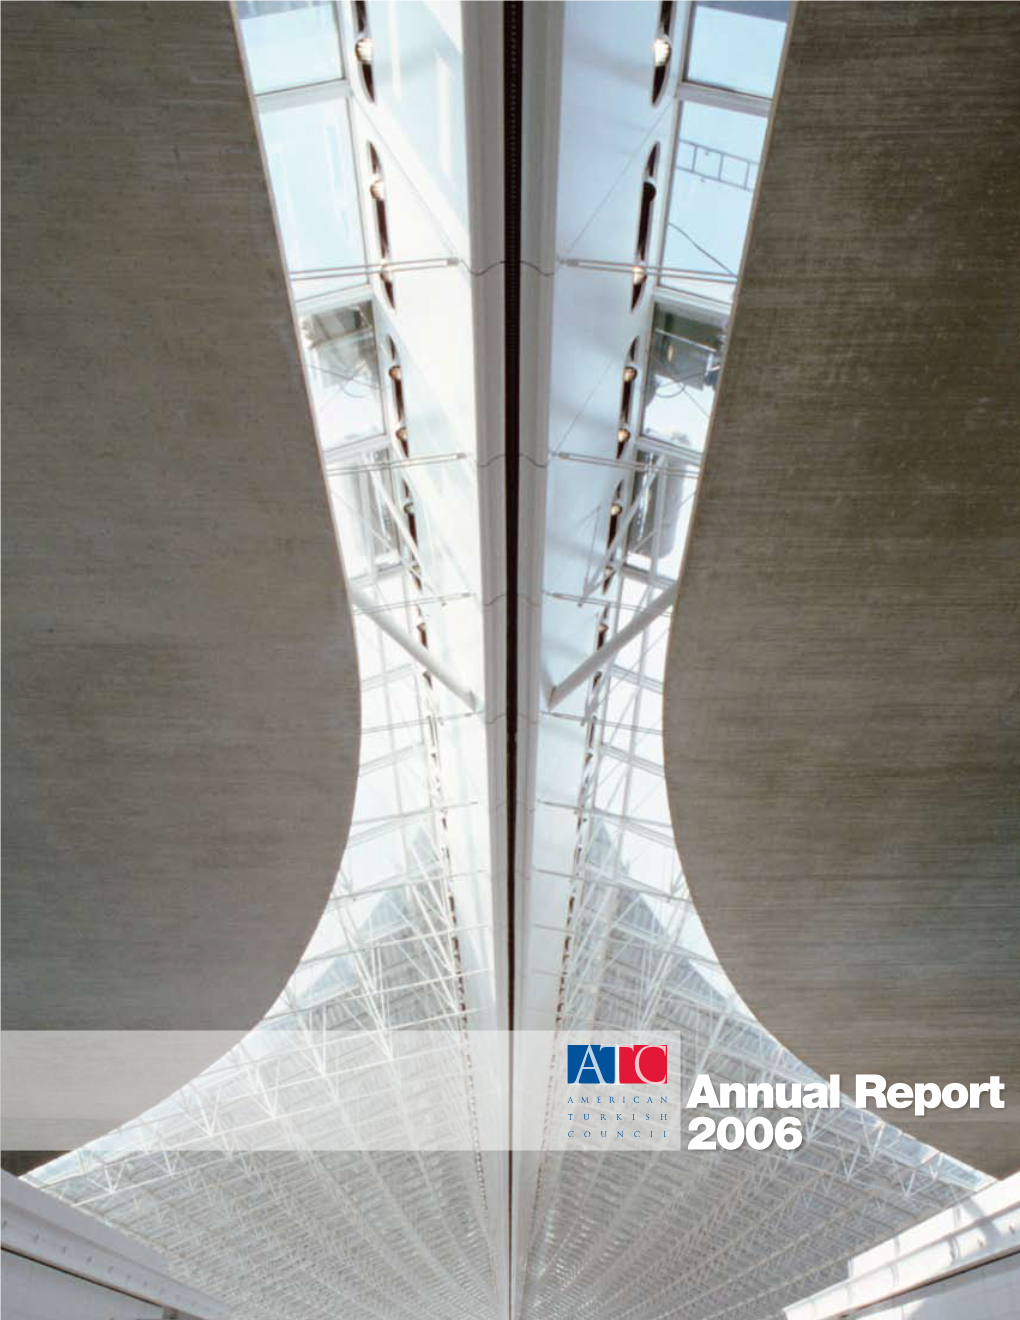 American-Turkish Council 2005-2006 Annual Report